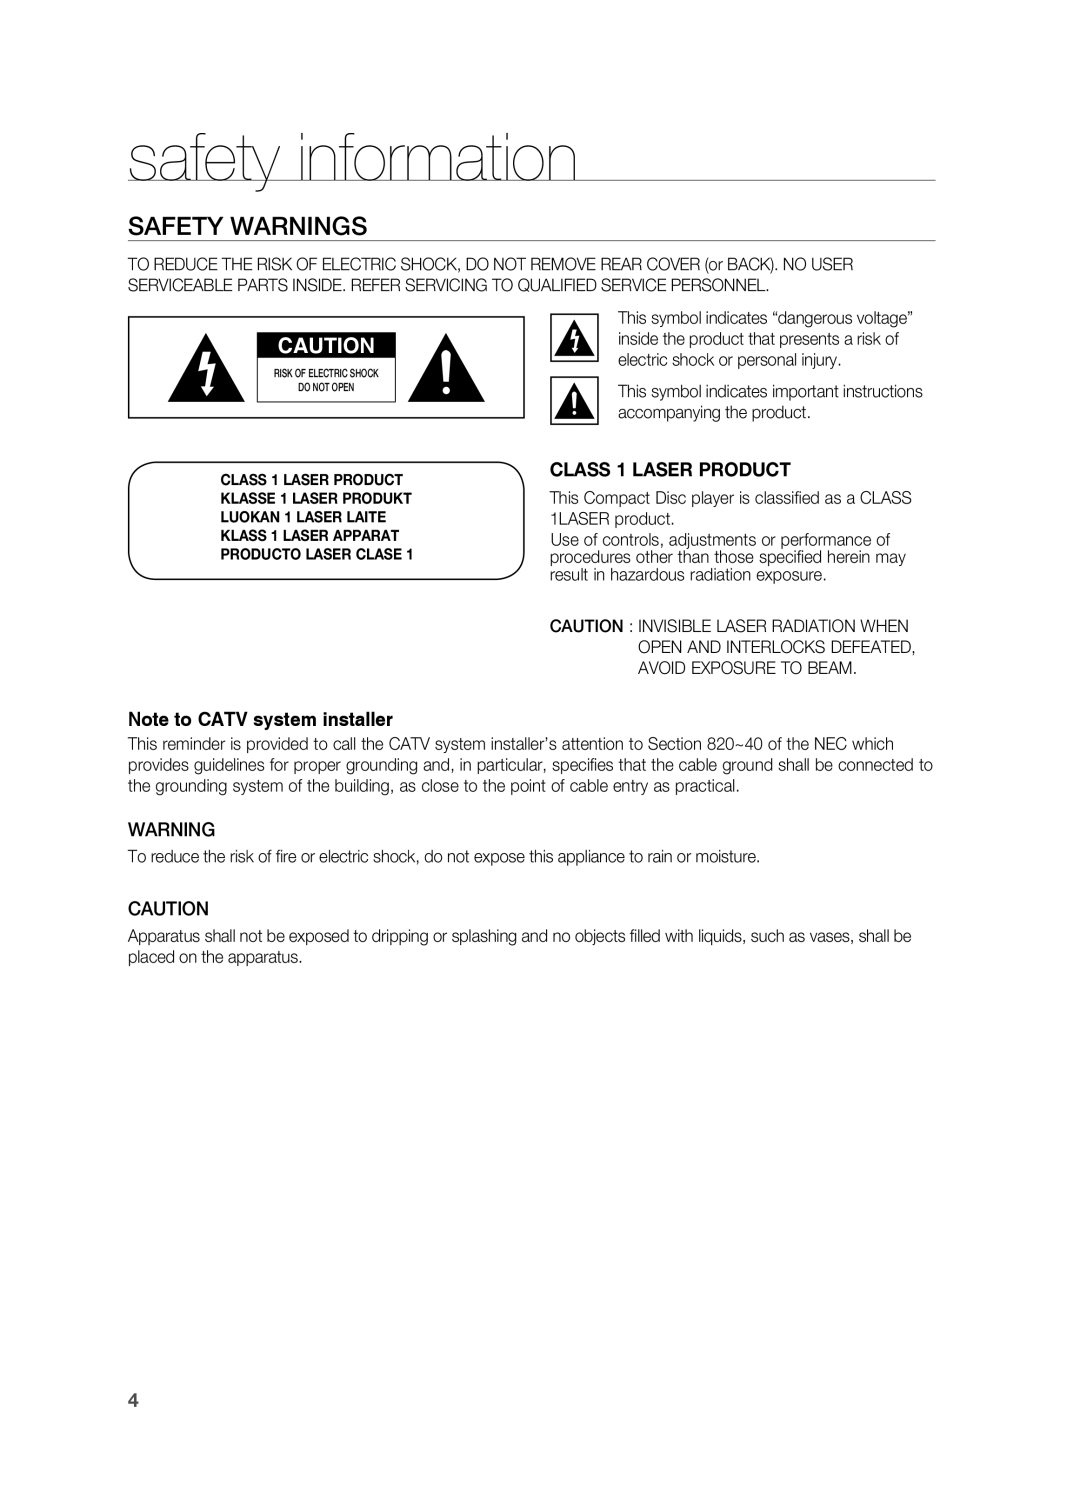 Samsung HT-TZ515 user manual safety information, Safety Warnings, Note to CATV system installer, CLASS 1 LASER PRODUCT 